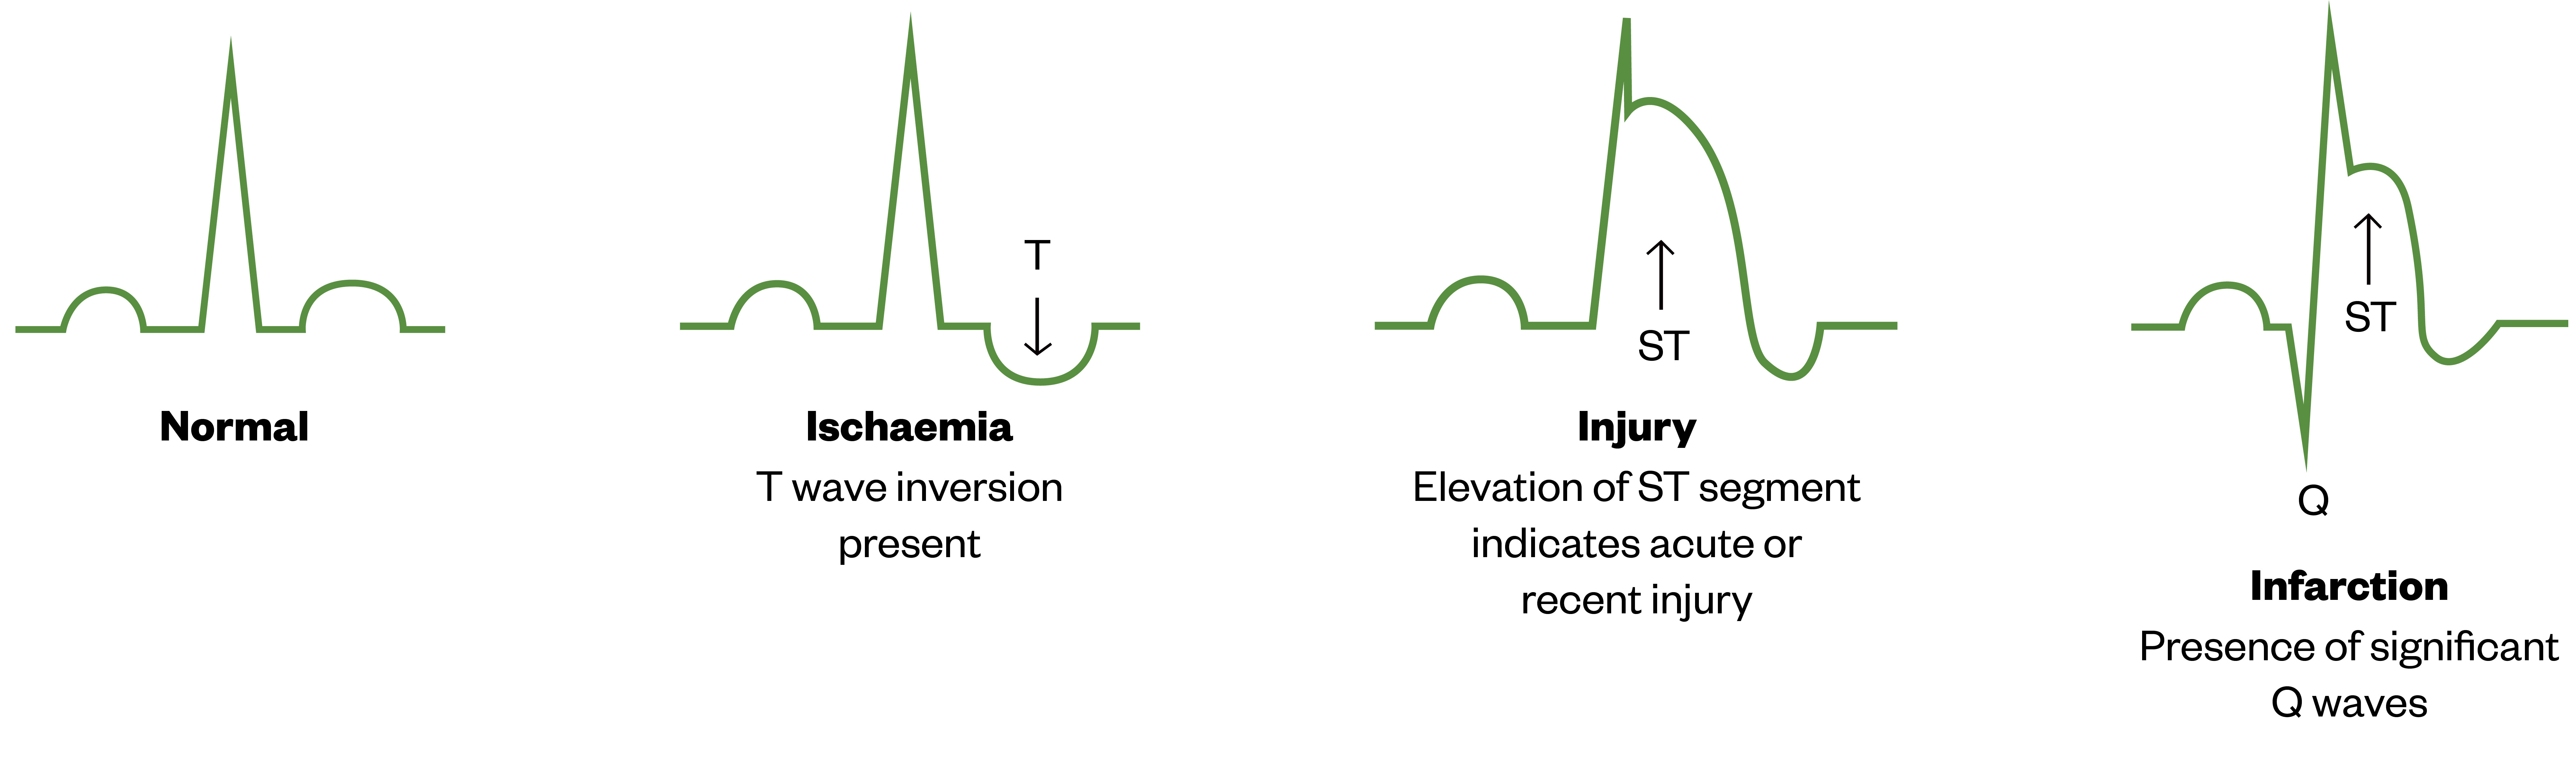 Figure 2: A simplified diagram illustrating expected ECG changes in myocardial ischaemia, injury and infarction